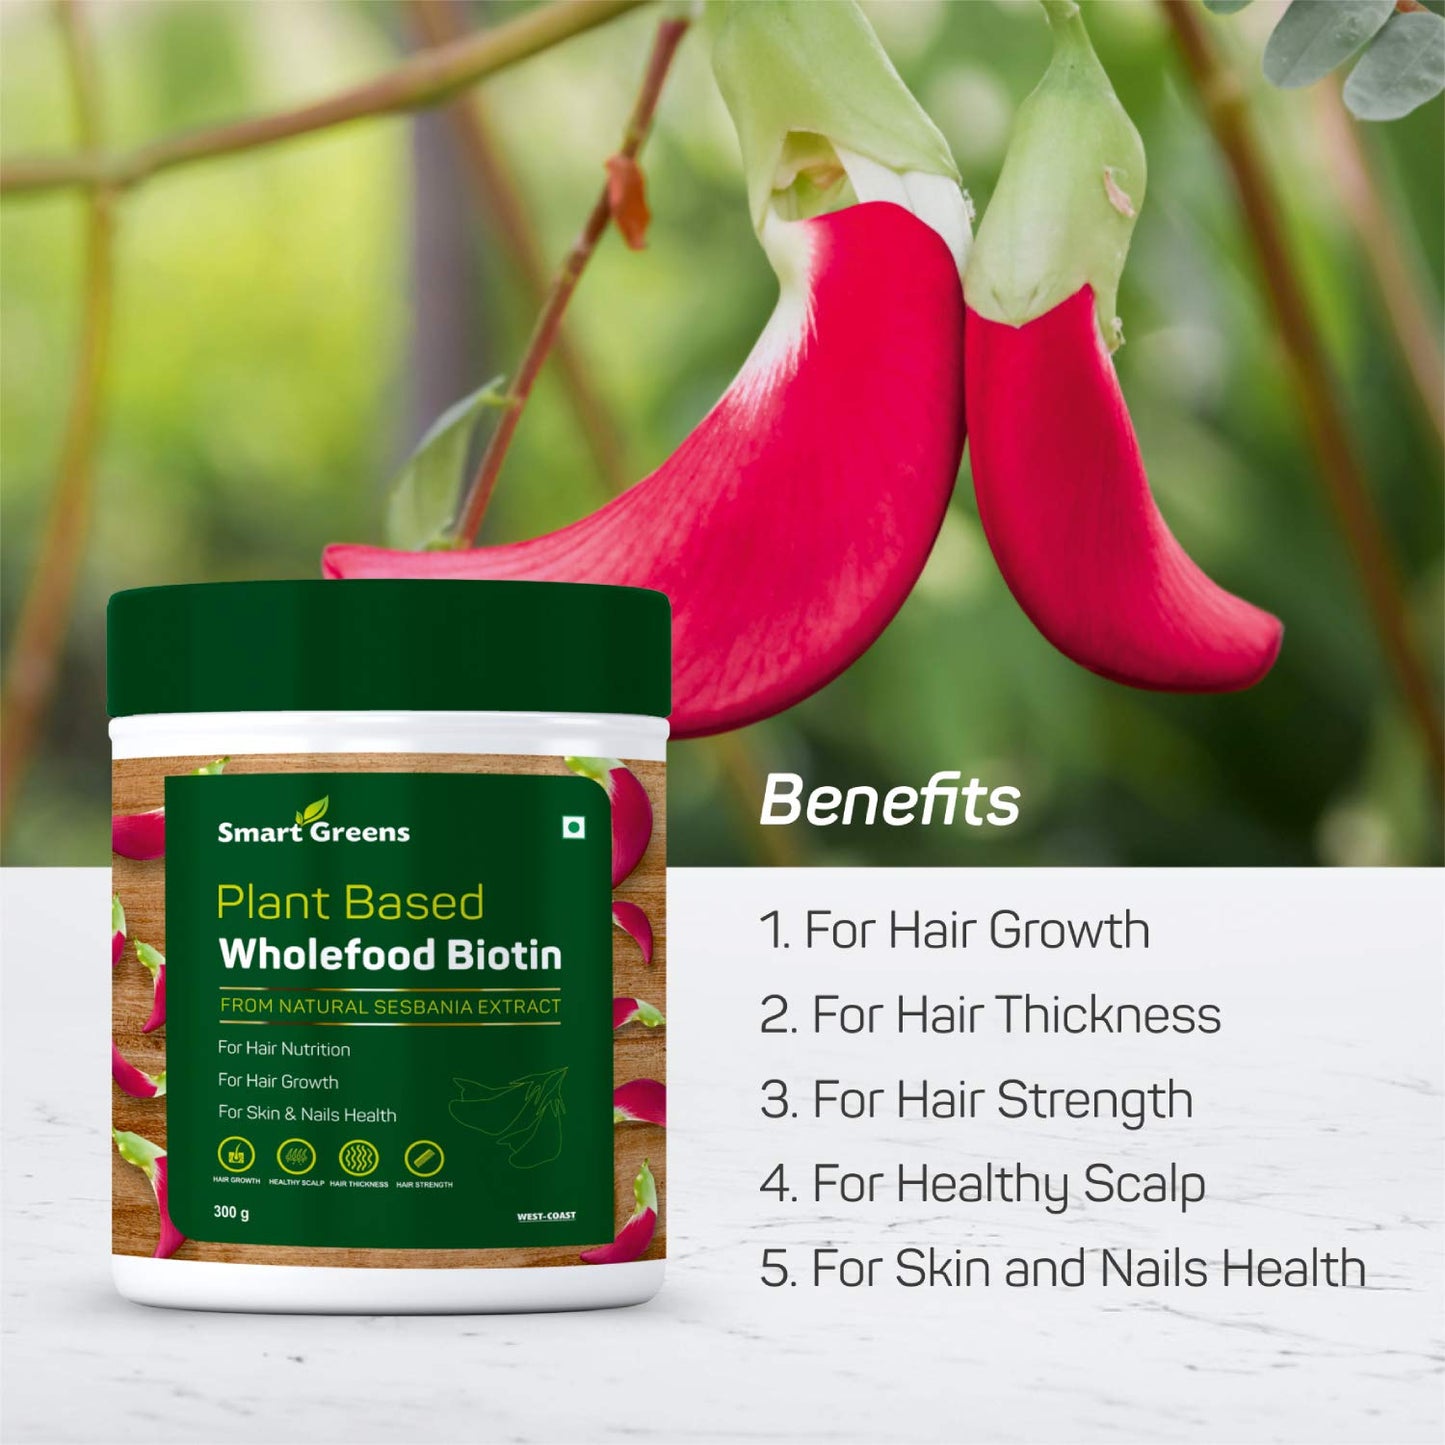 Smart Greens Plant Based Wholefood Biotin Powder High-Potency Hair Nutrition Hair fall Premature Greying Hair Growth Healthy Scalp and Skin  Nails Health - 300gm